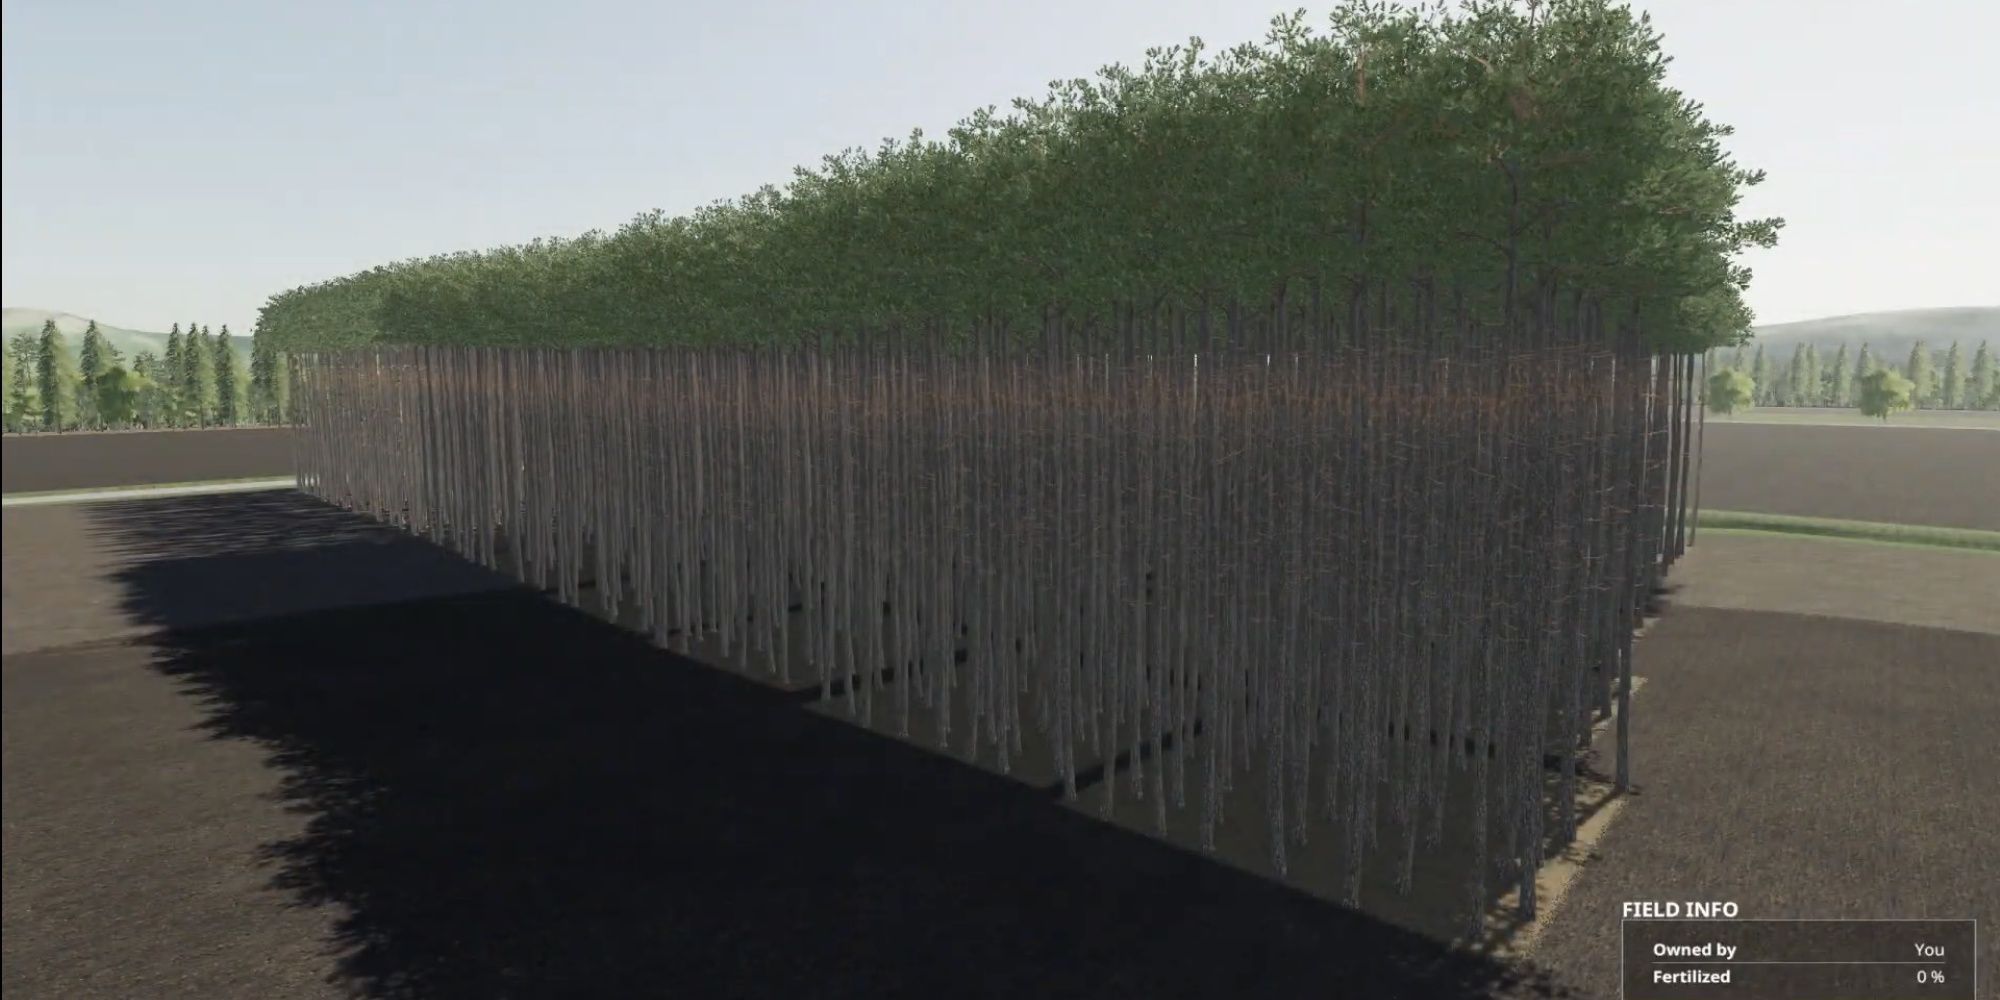 A plot of user-placed trees via the Farming Simulator 19 Placeable Trees Pack